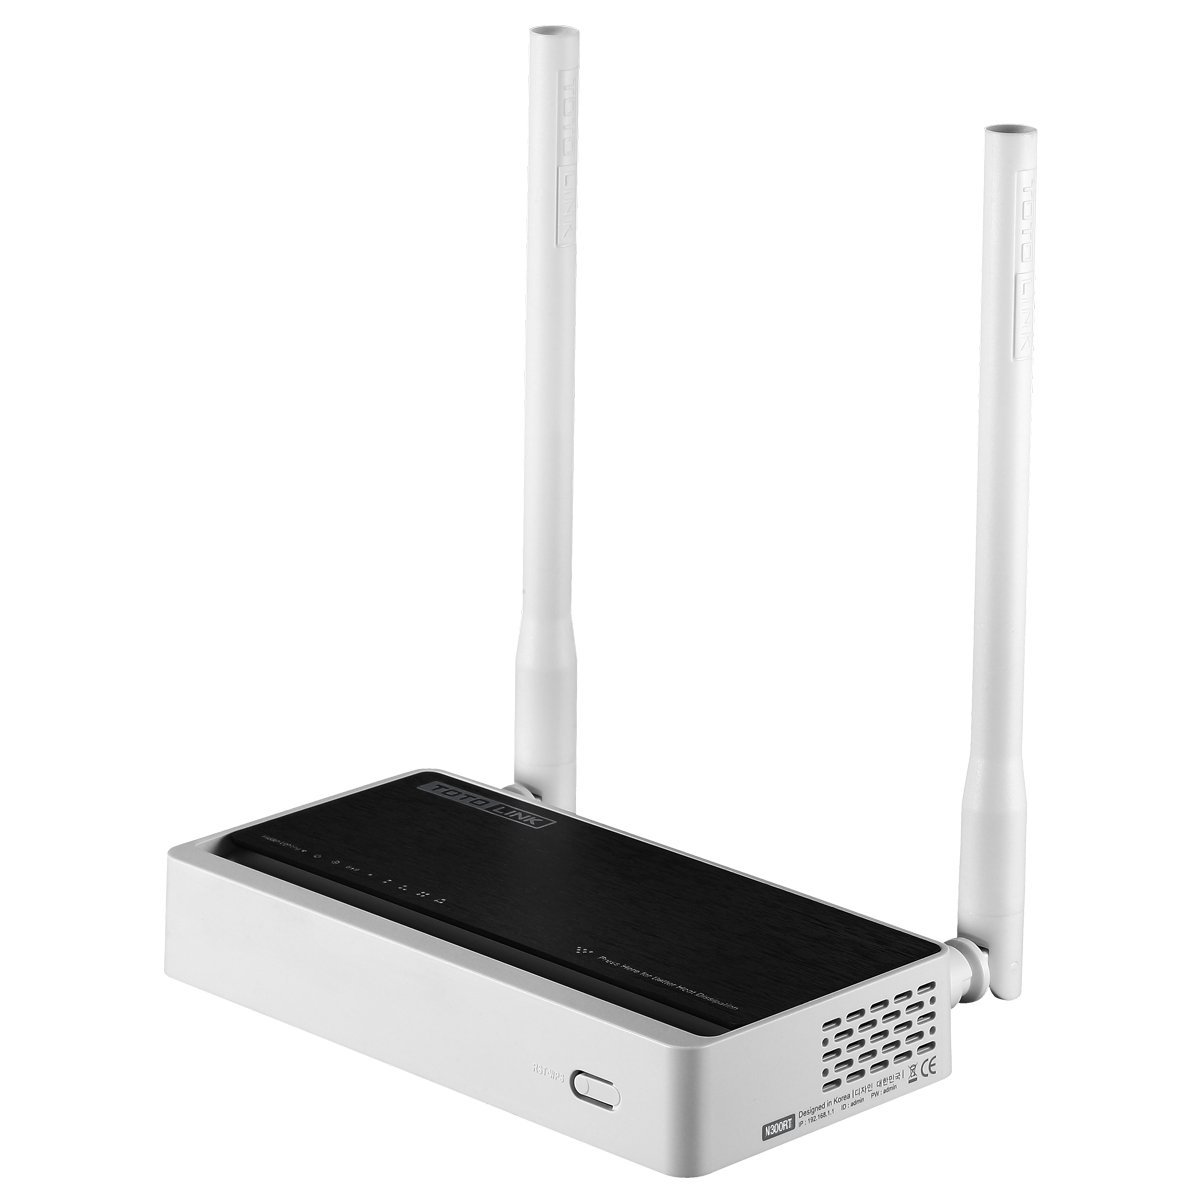 TOTO LINK N300RT 300Mbps Wireless-N Dual Access Wi-Fi Router